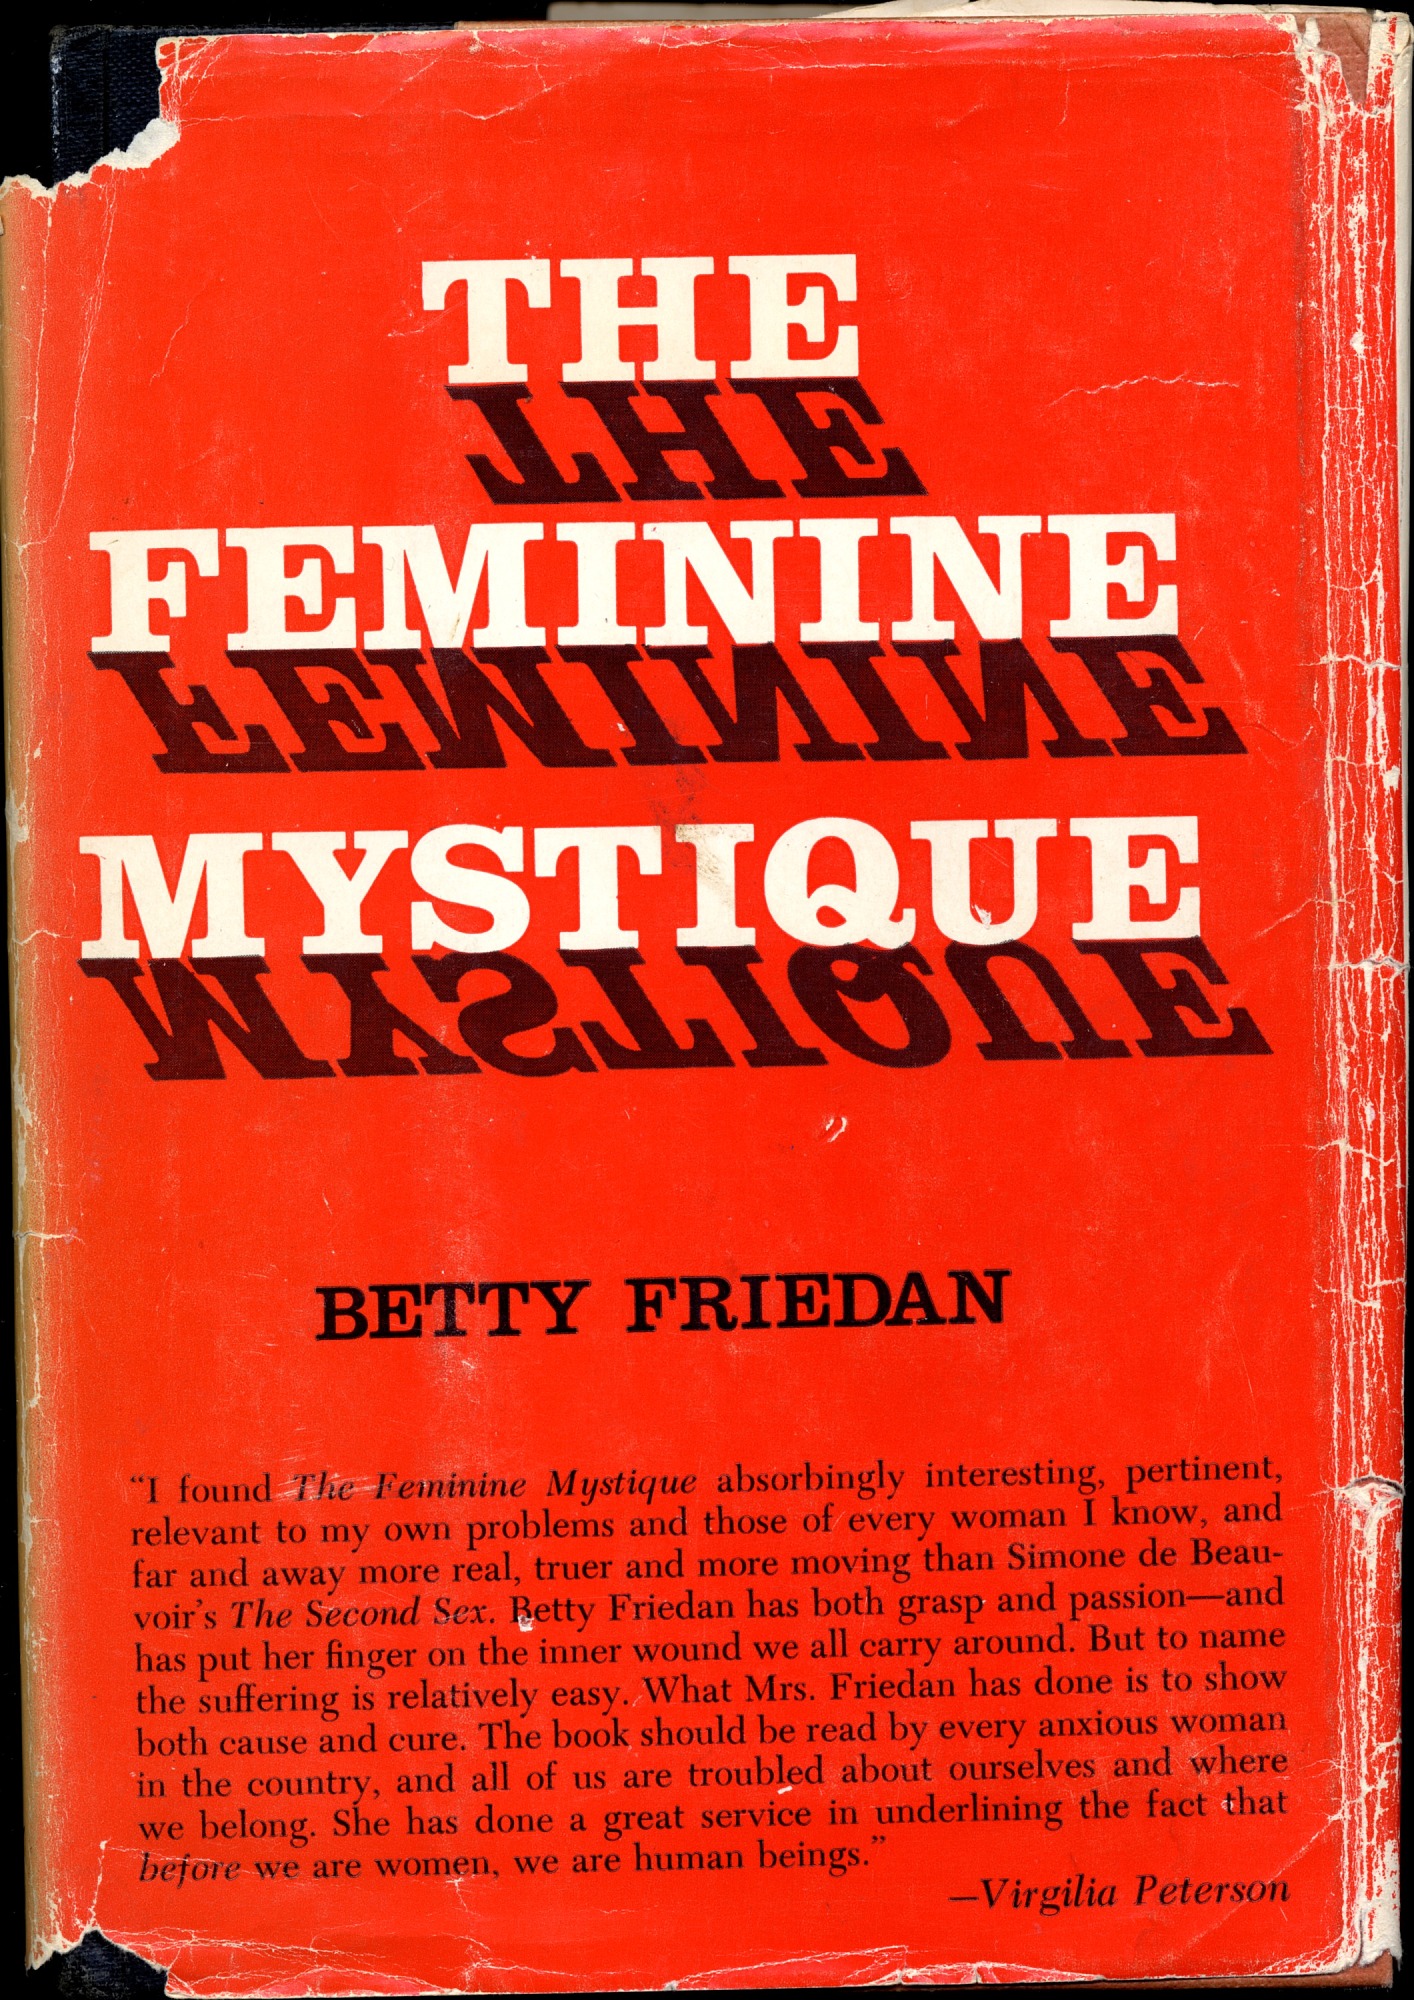 Red book cover for “The Feminine Mystique” by Betty Friedan.